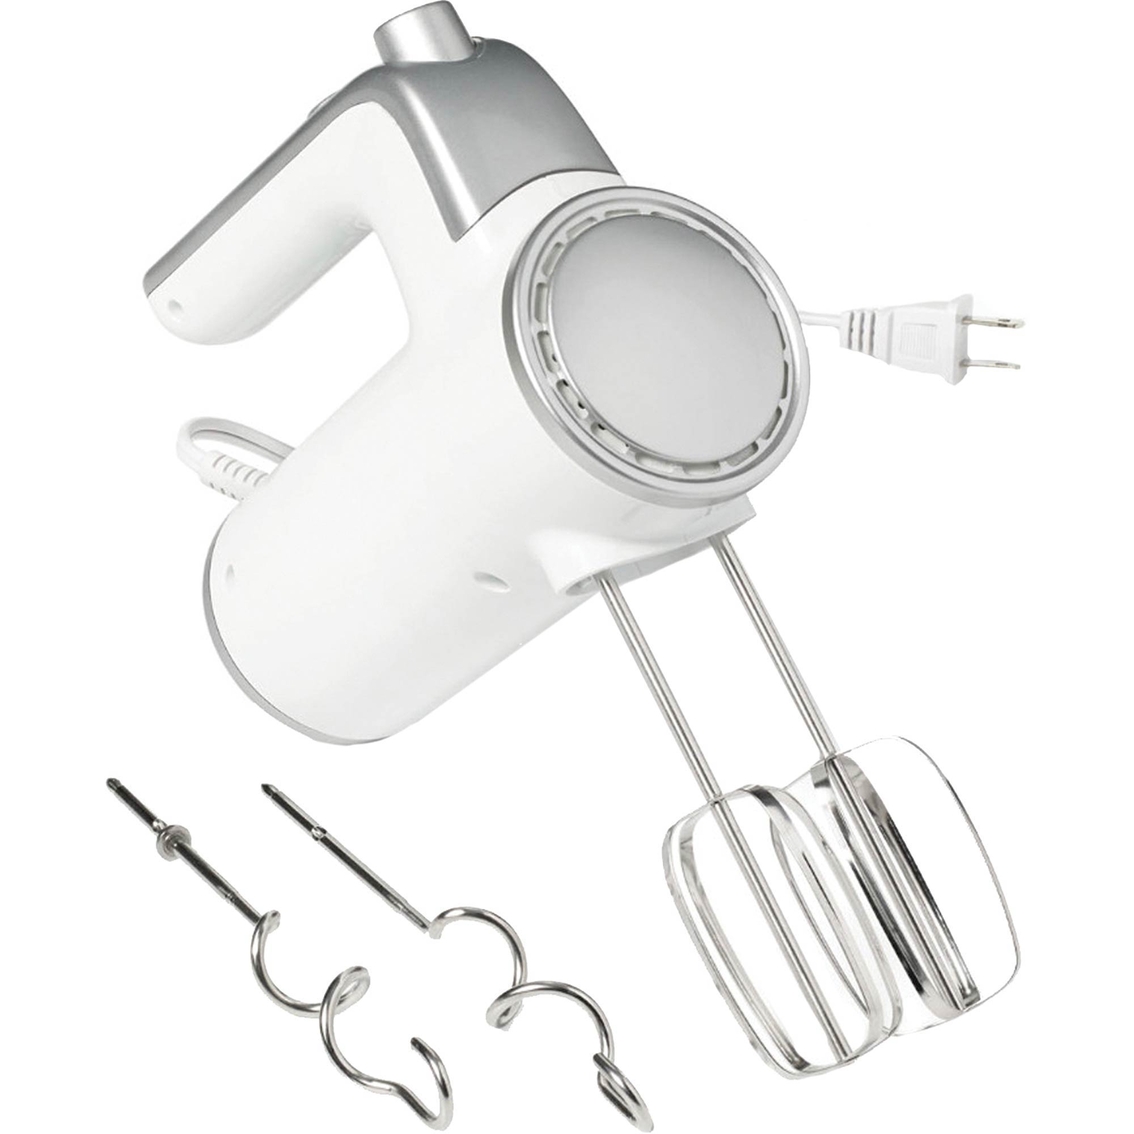 Starfrit 6 Speed 250W Electric Hand Mixer - Image 3 of 5